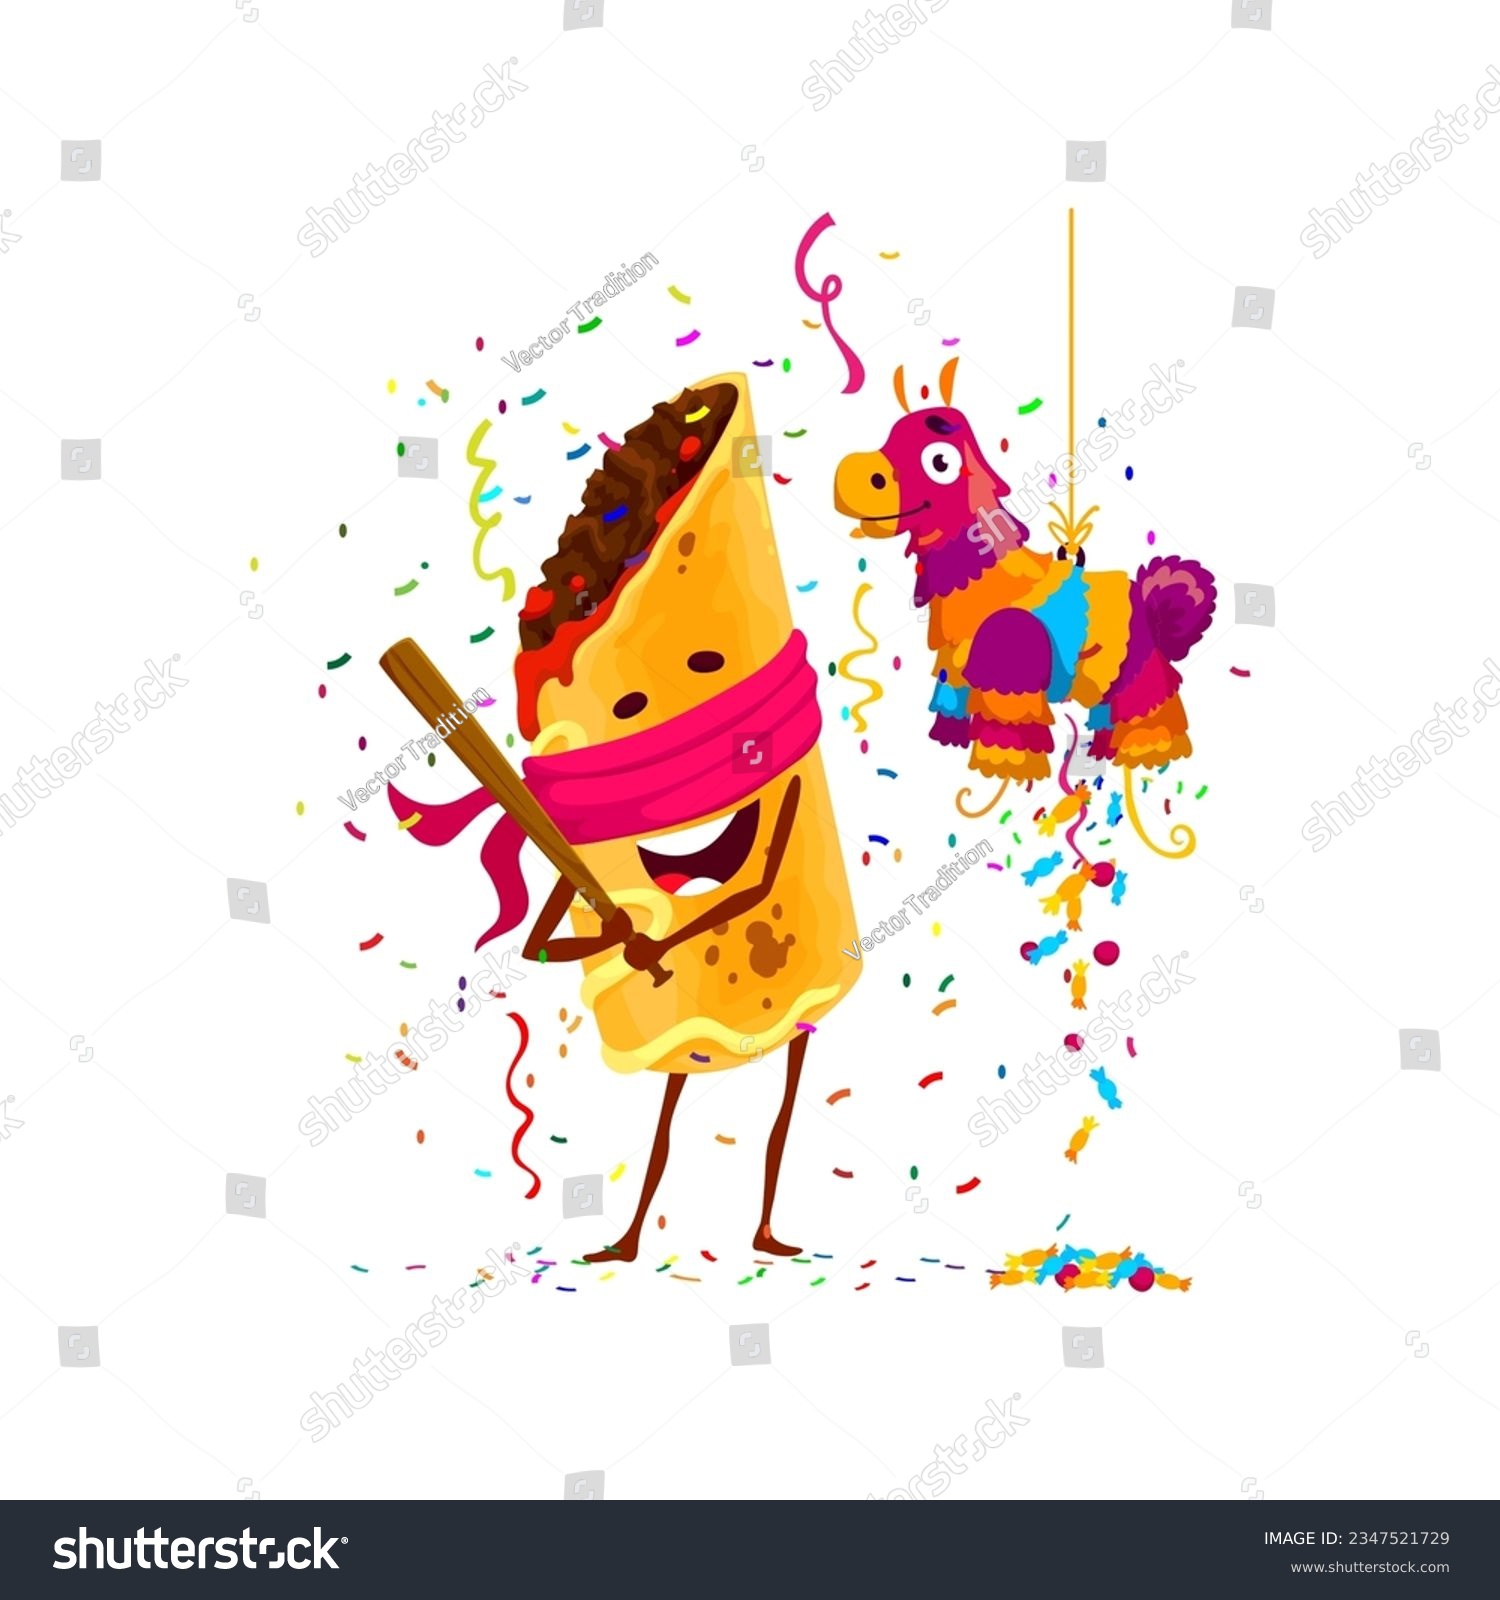 SVG of Mexican tex mex chimichanga character on holiday party. Isolated vector food personage hitting festive pinata donkey with bat admist falling colorful confetti during birthday or carnival celebration svg